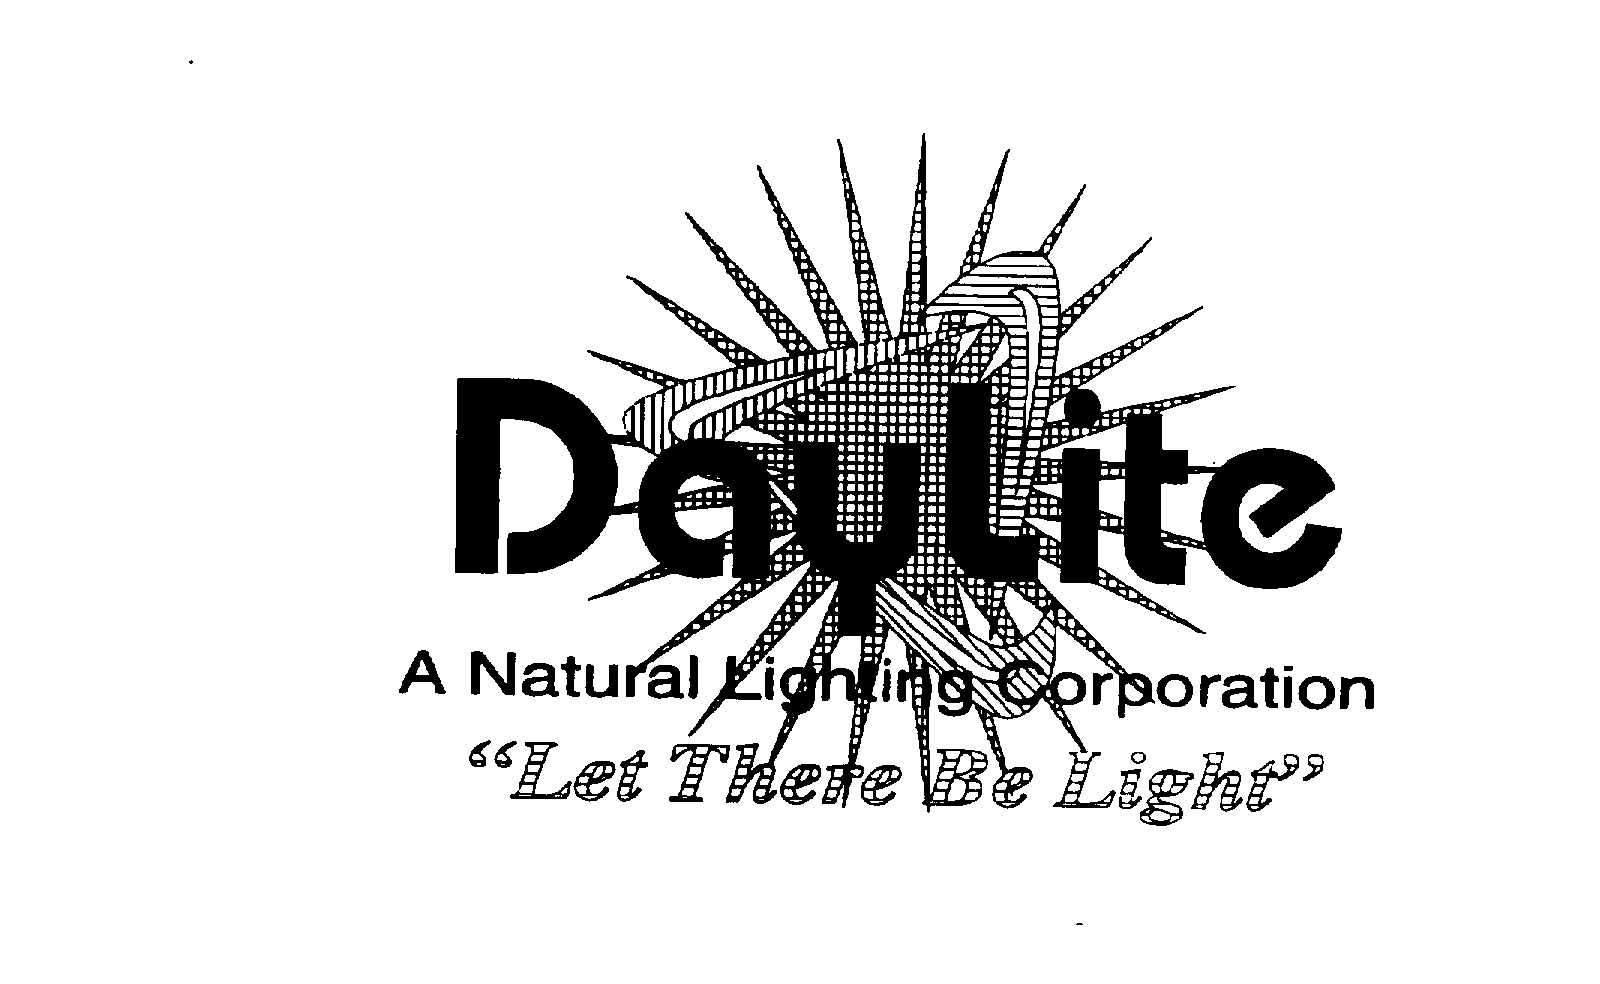  DAYLITE A NATURAL LIGHTING CORPORATION "LET THERE BE LIGHT